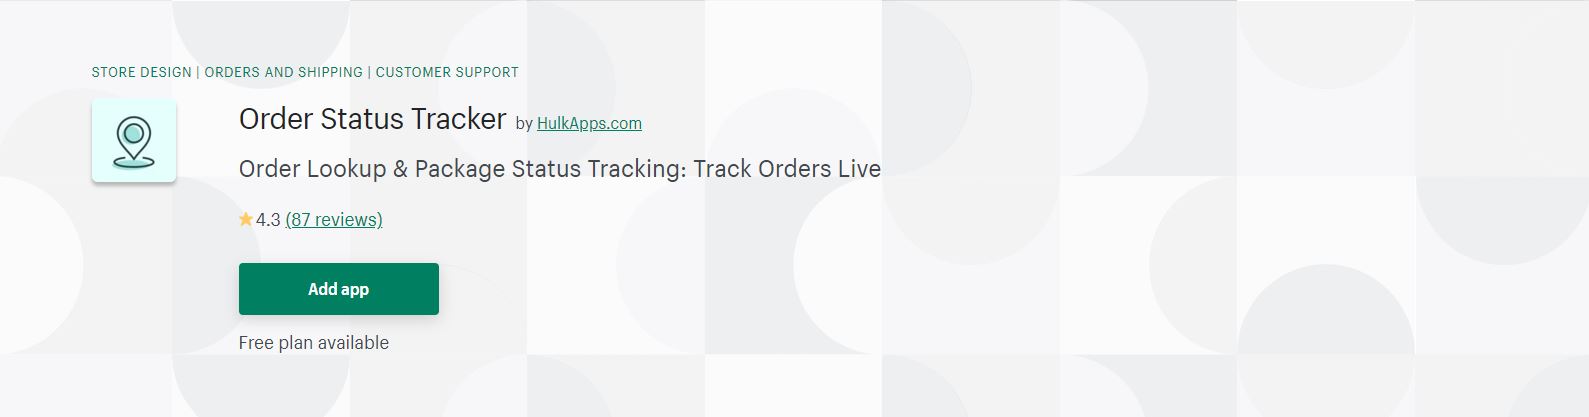 Shopify order tracking app